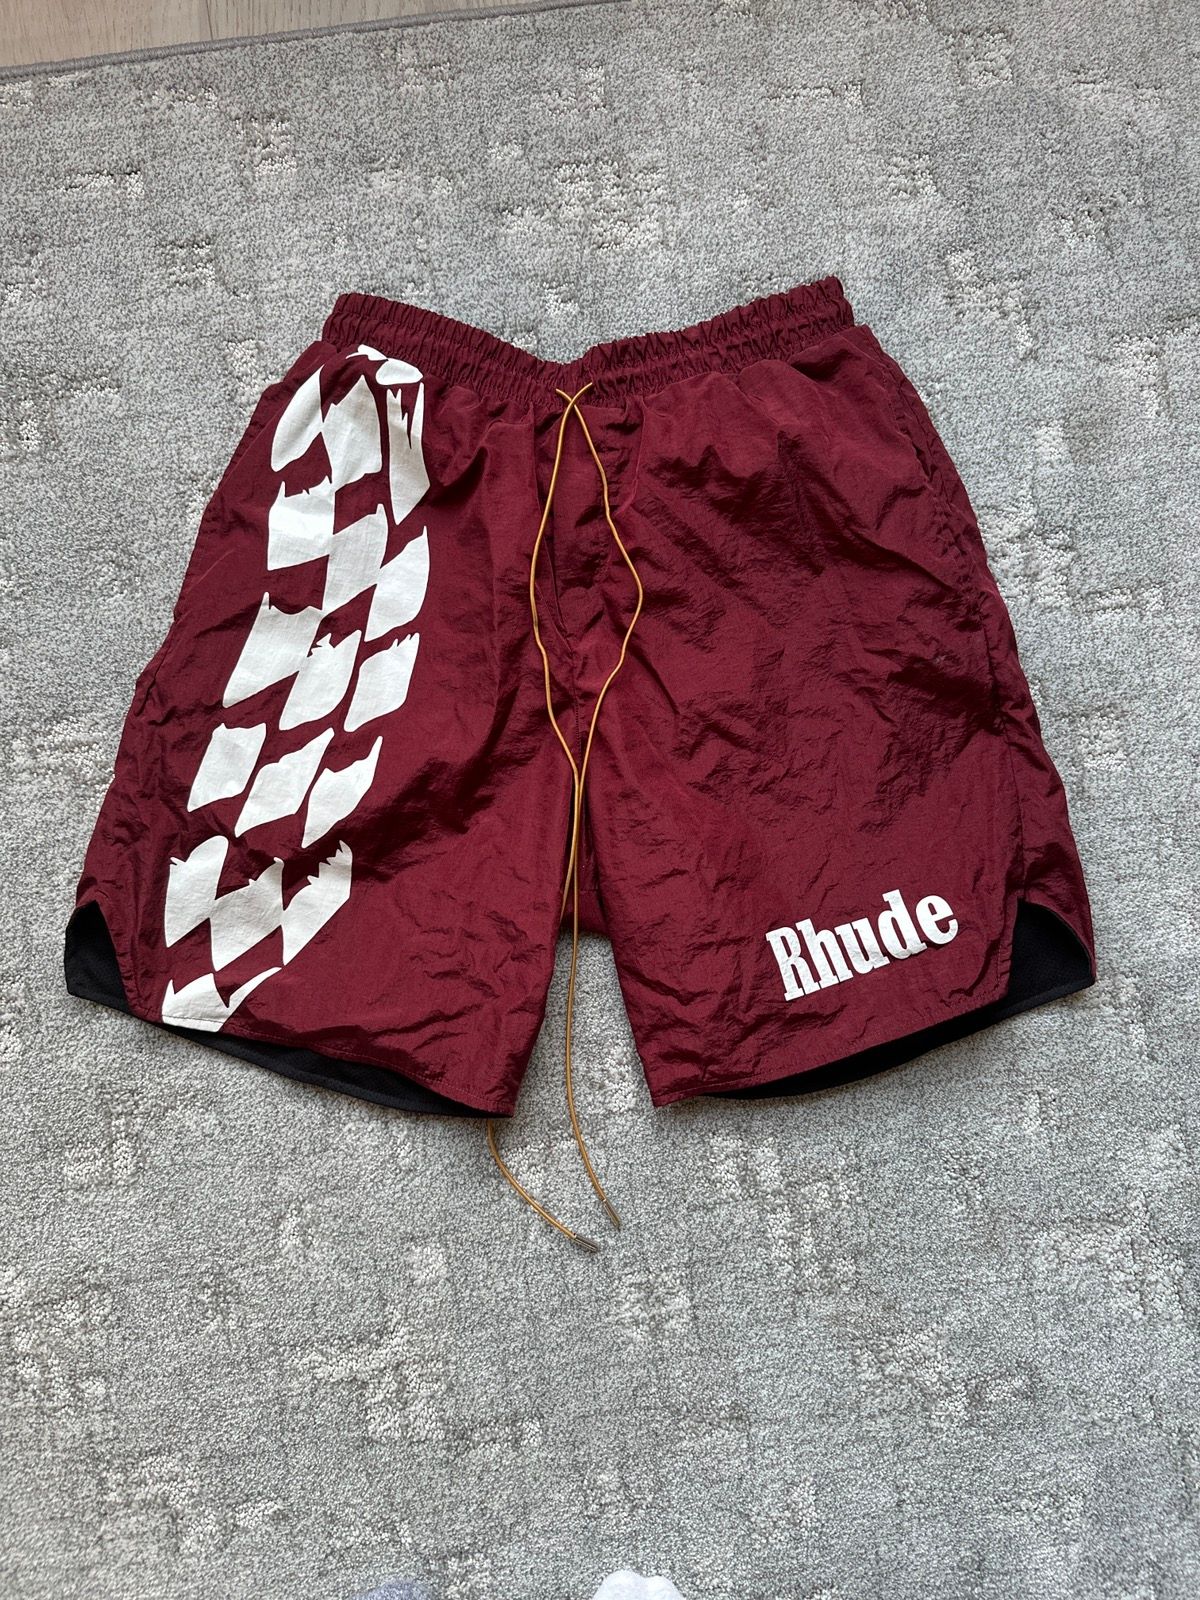 Pre-owned Rhude Warm Up Track Shorts Burgundy Size L